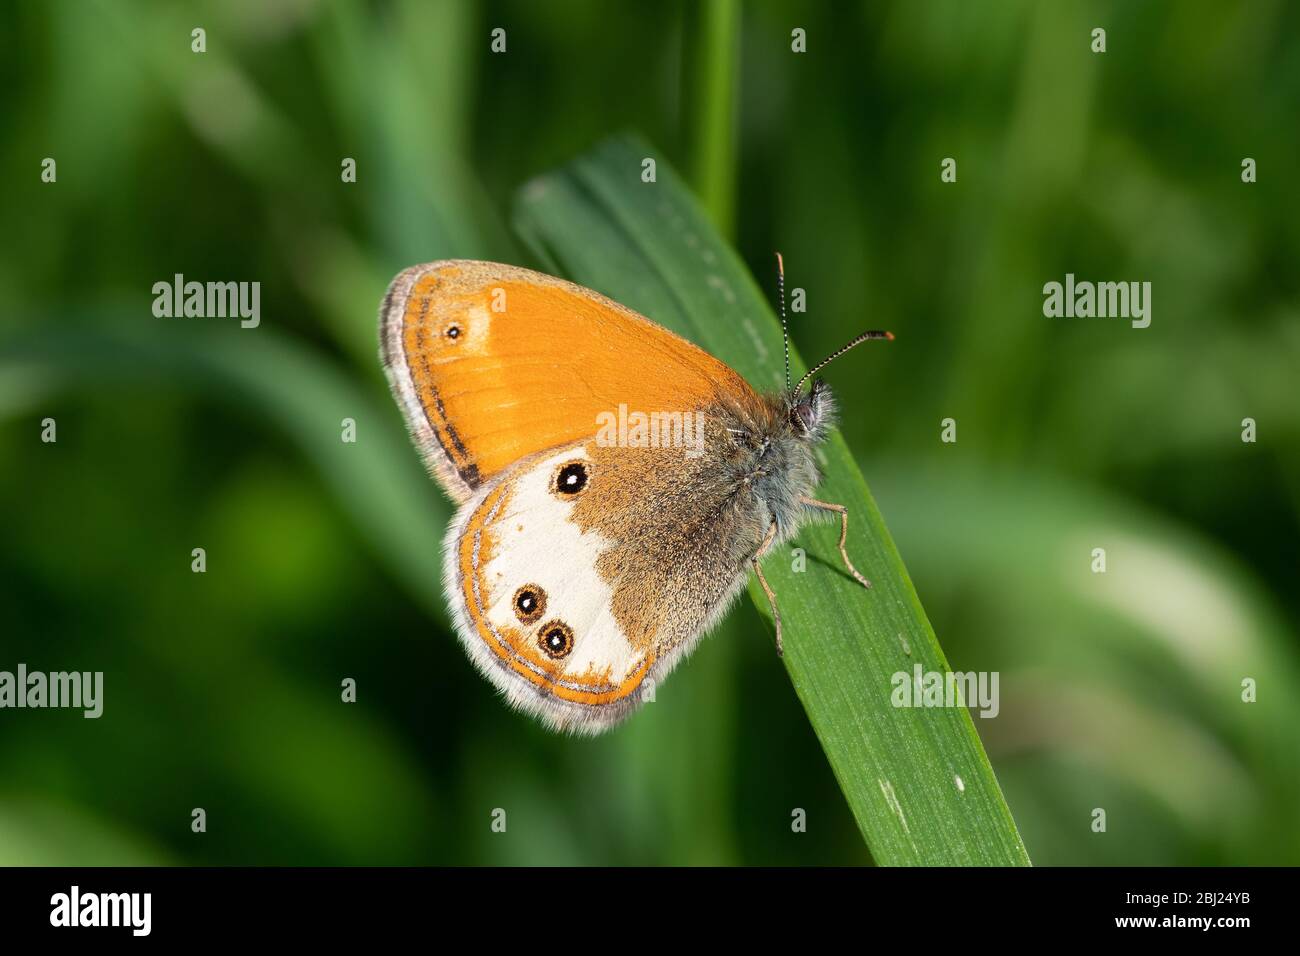 Close-up of a butterfly in the grass Stock Photo